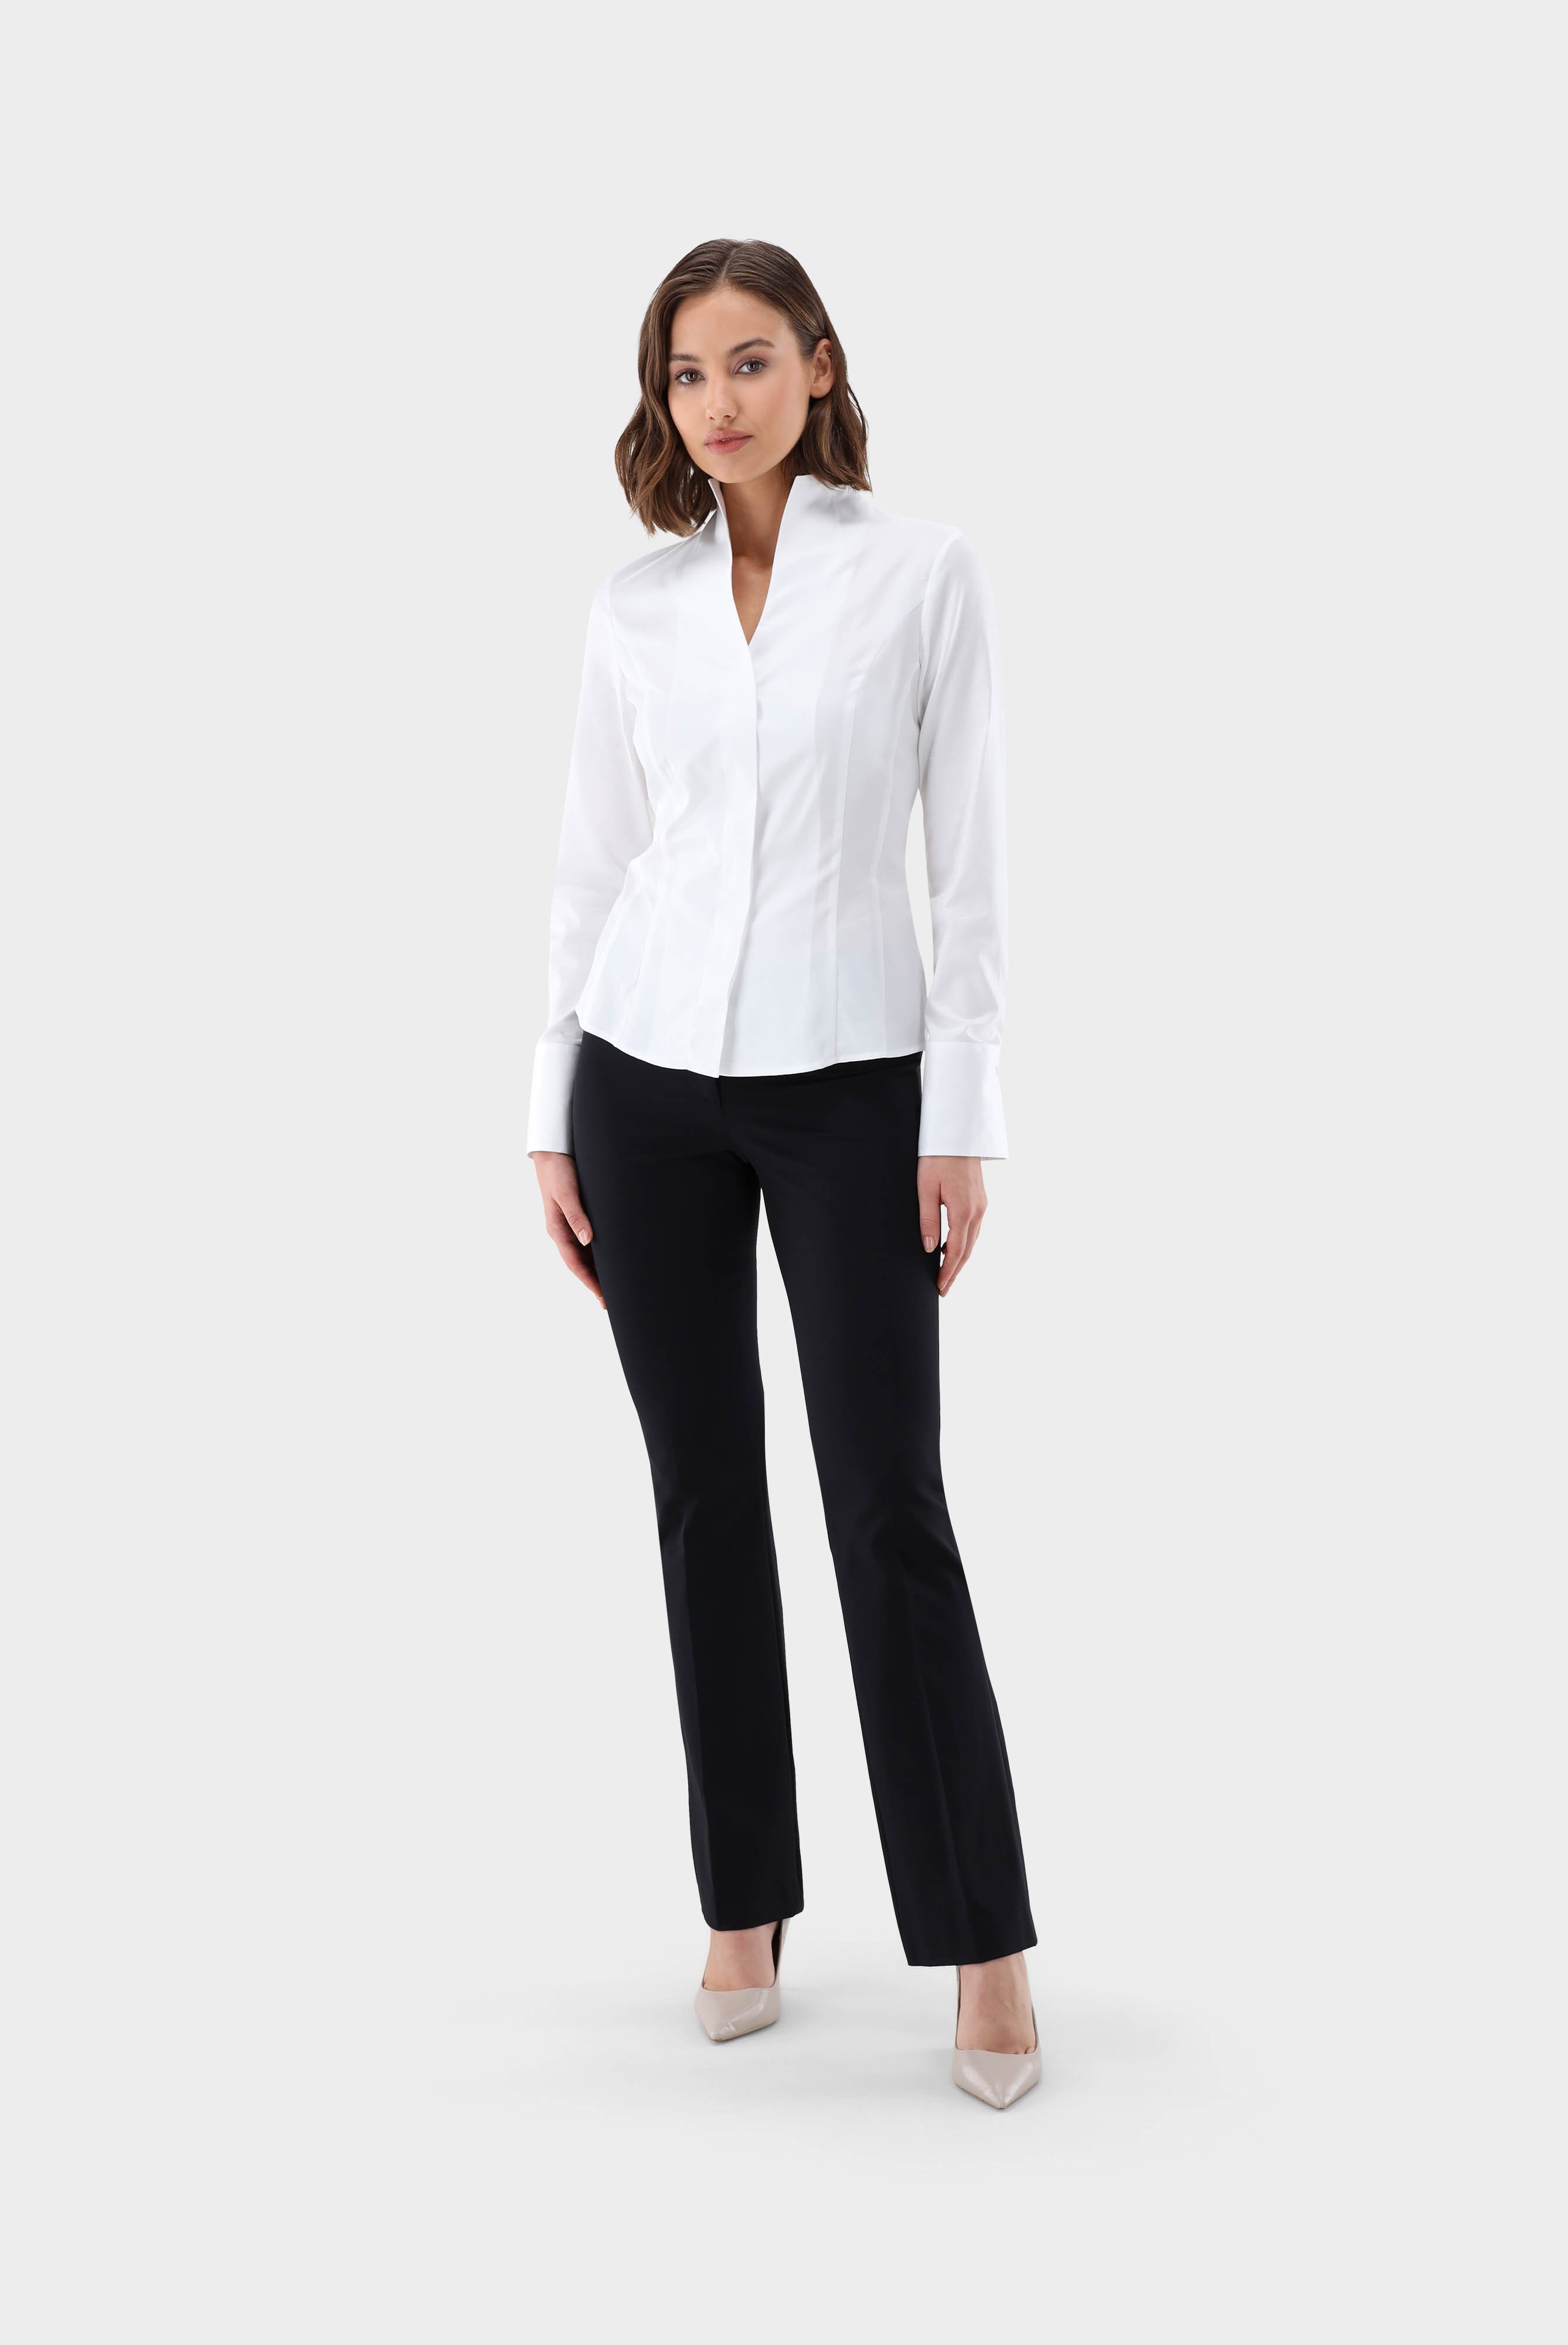 Business Blouses+Twill Chalice Collar Blouse+05.3612.73.130148.000.32